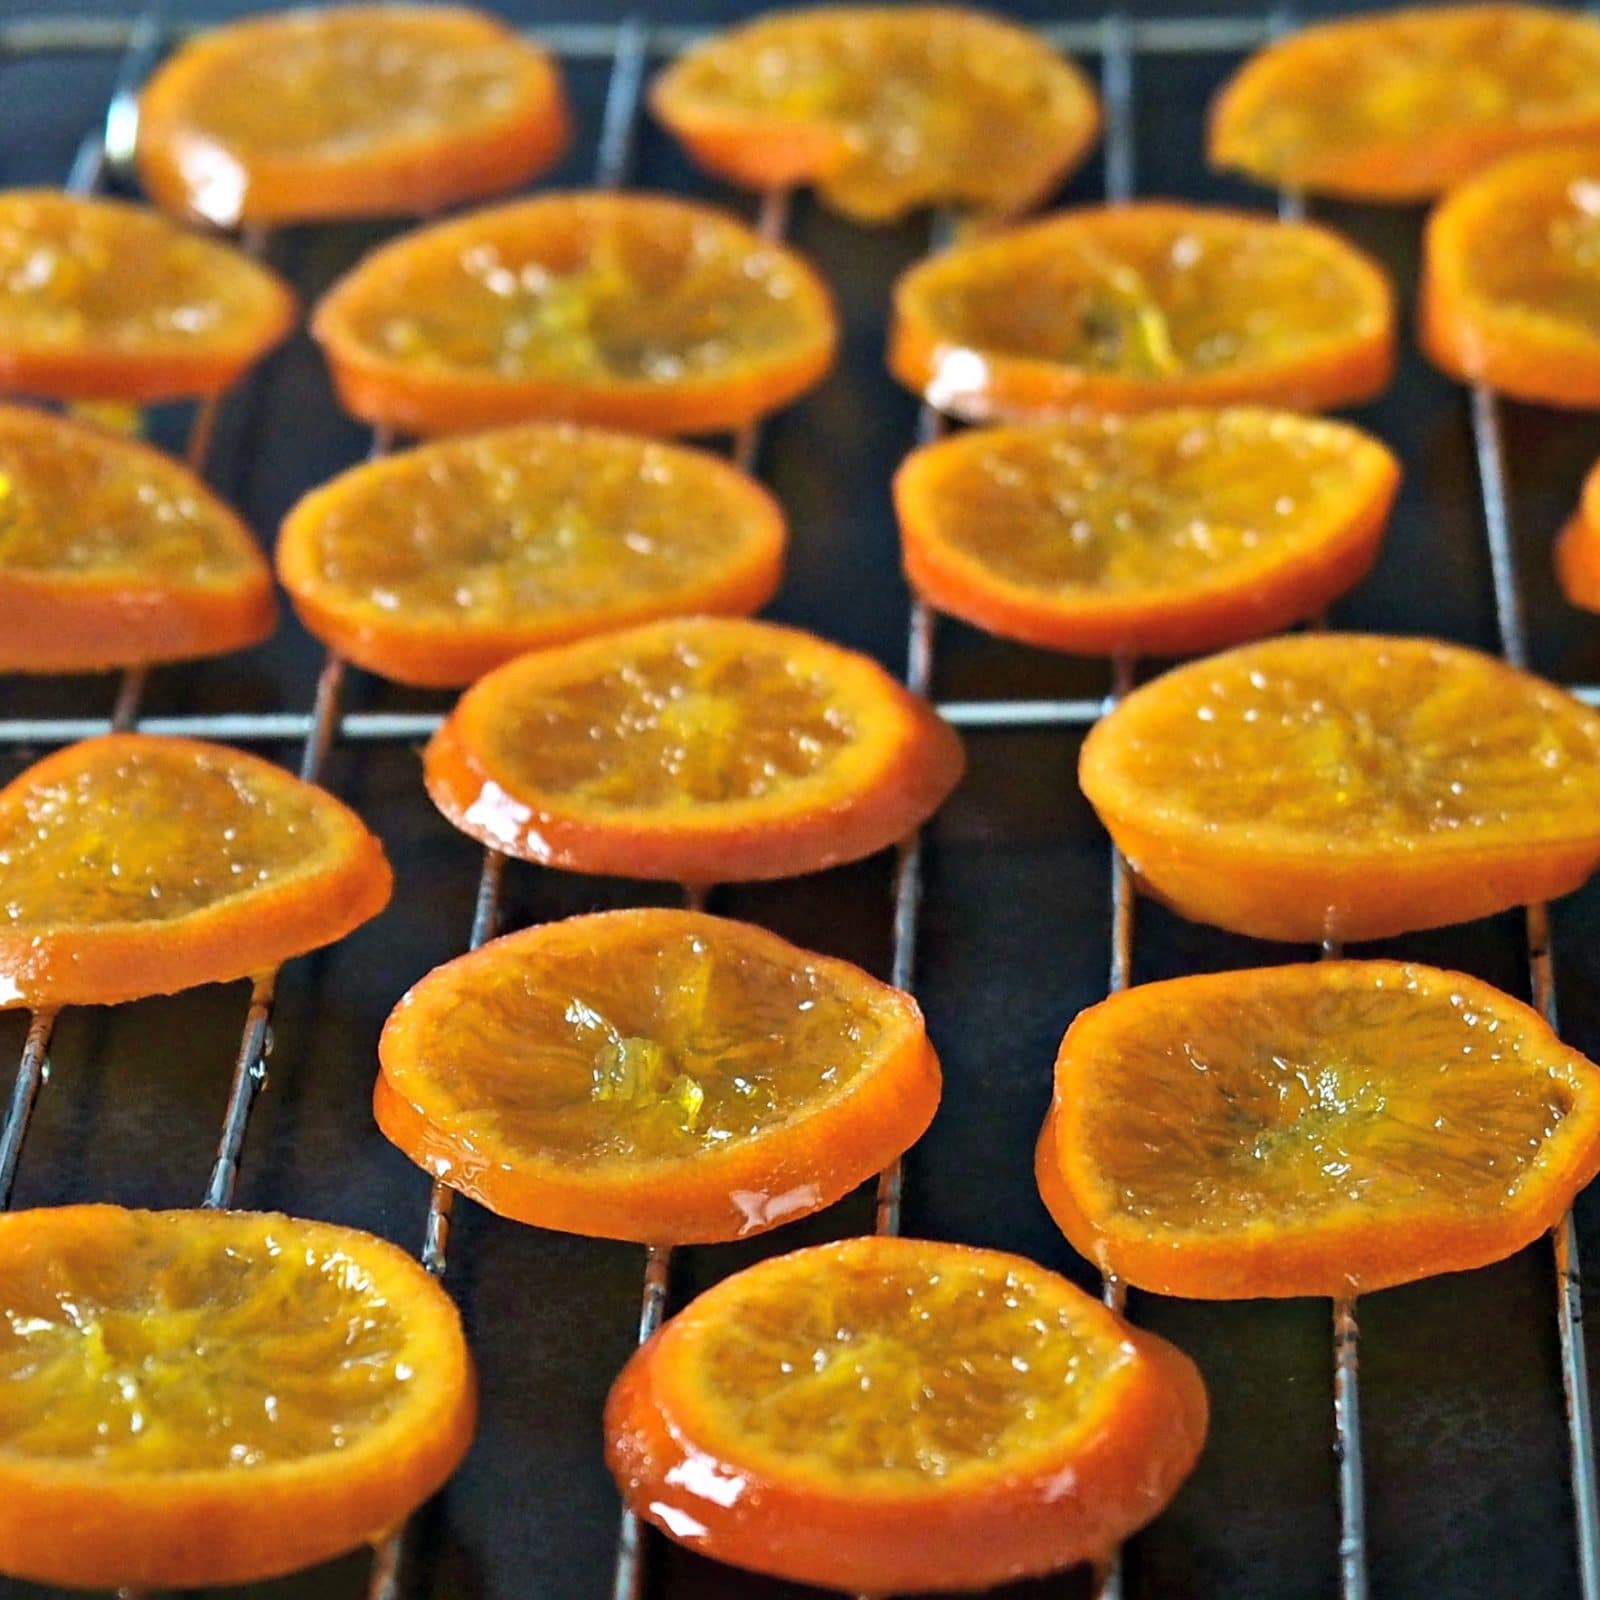 Candied Orange Slices - Simply Sated